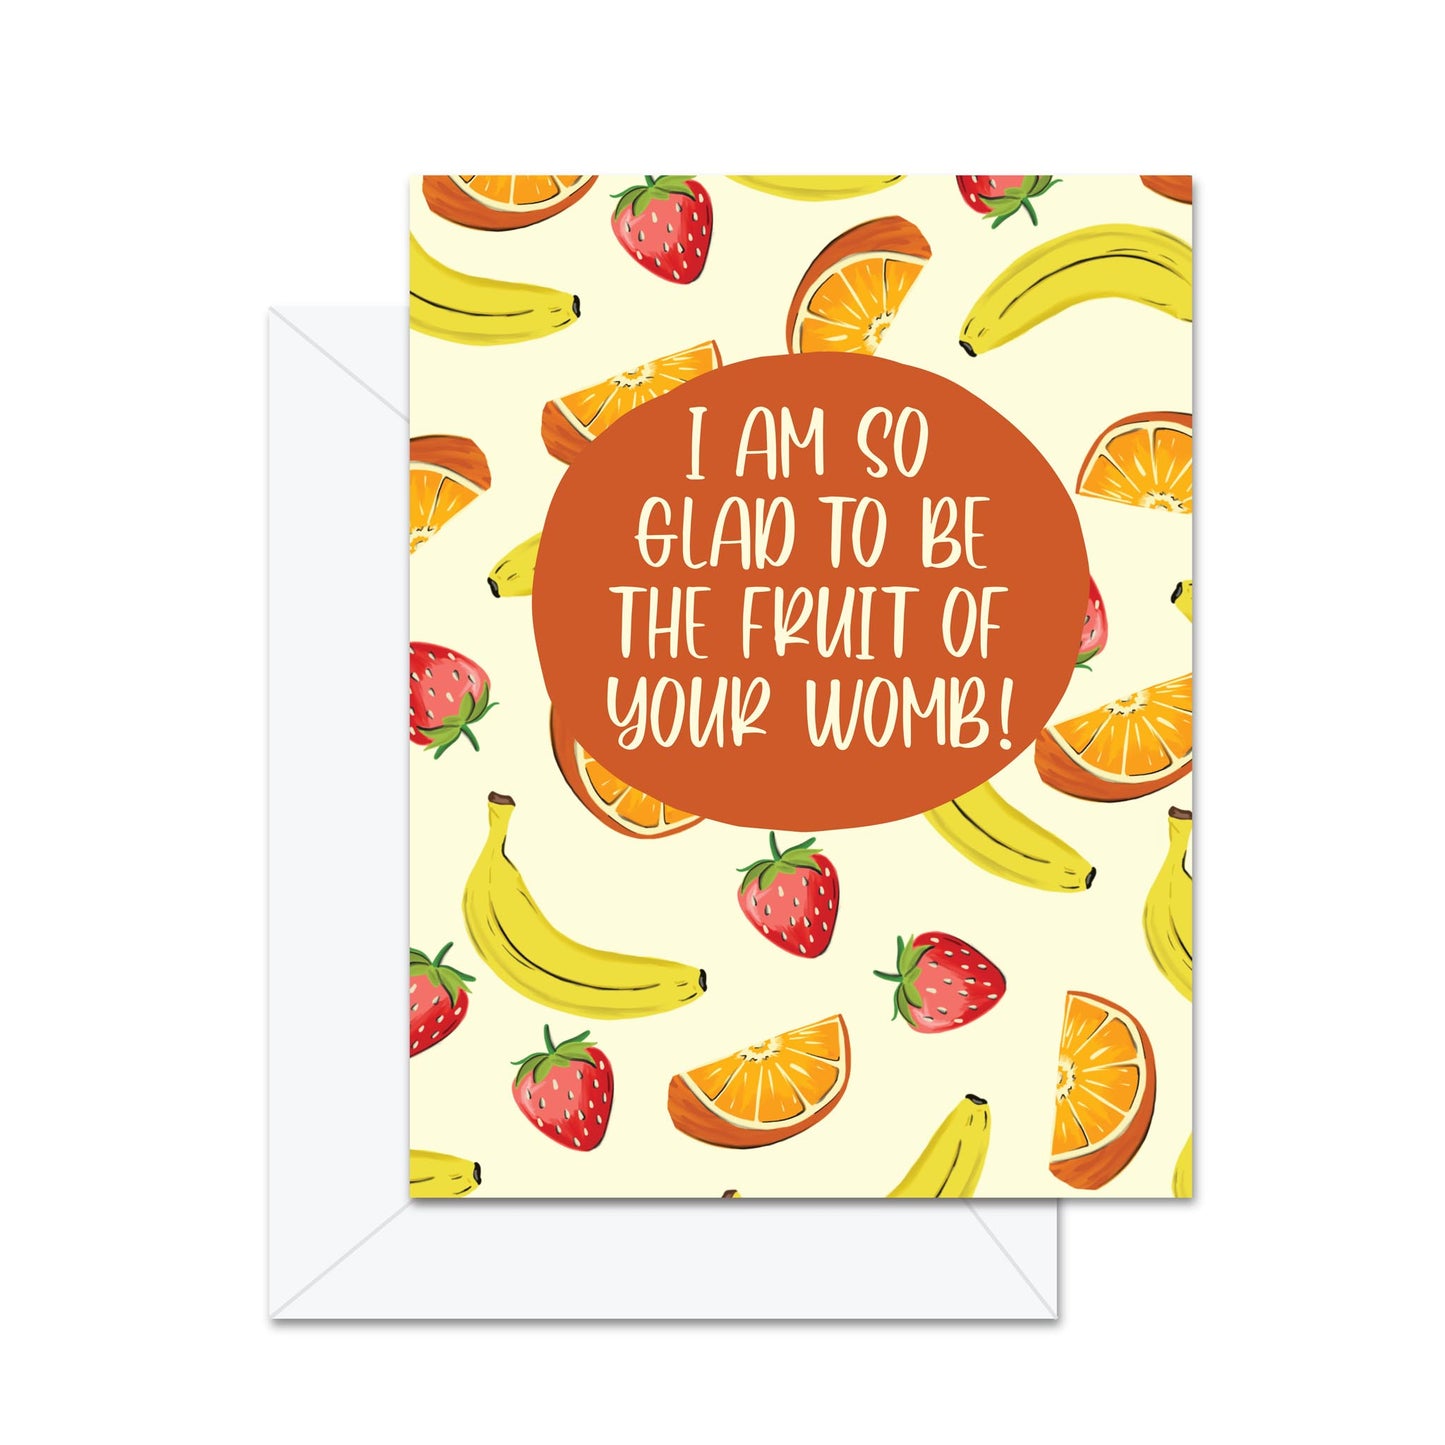 I Am So Glad To Be The Fruit Of Your Womb! - Greeting Card